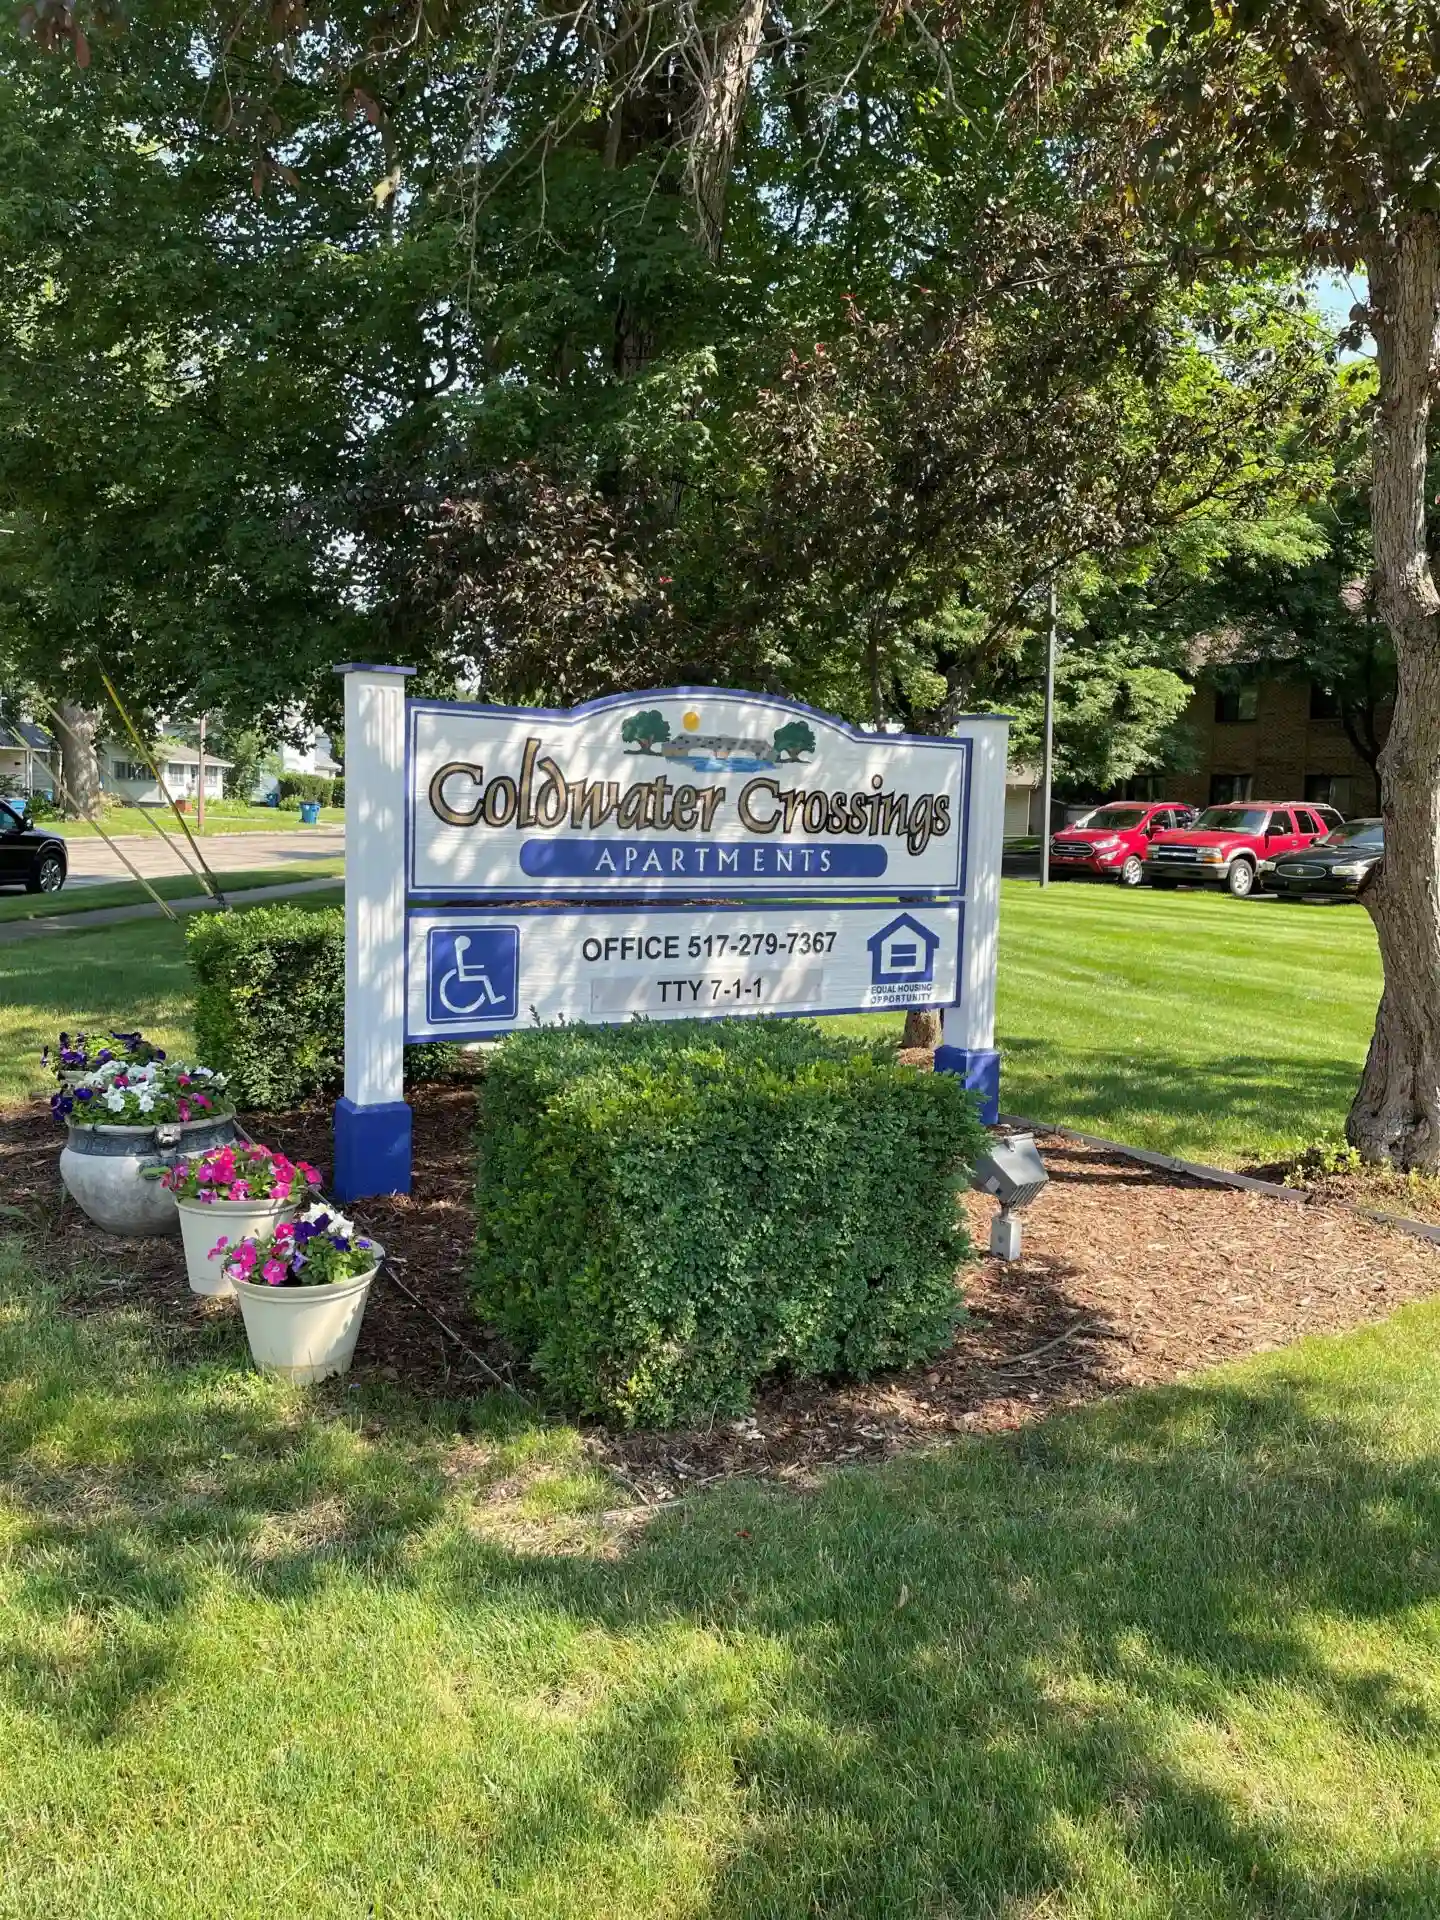 Coldwater Crossings sign board